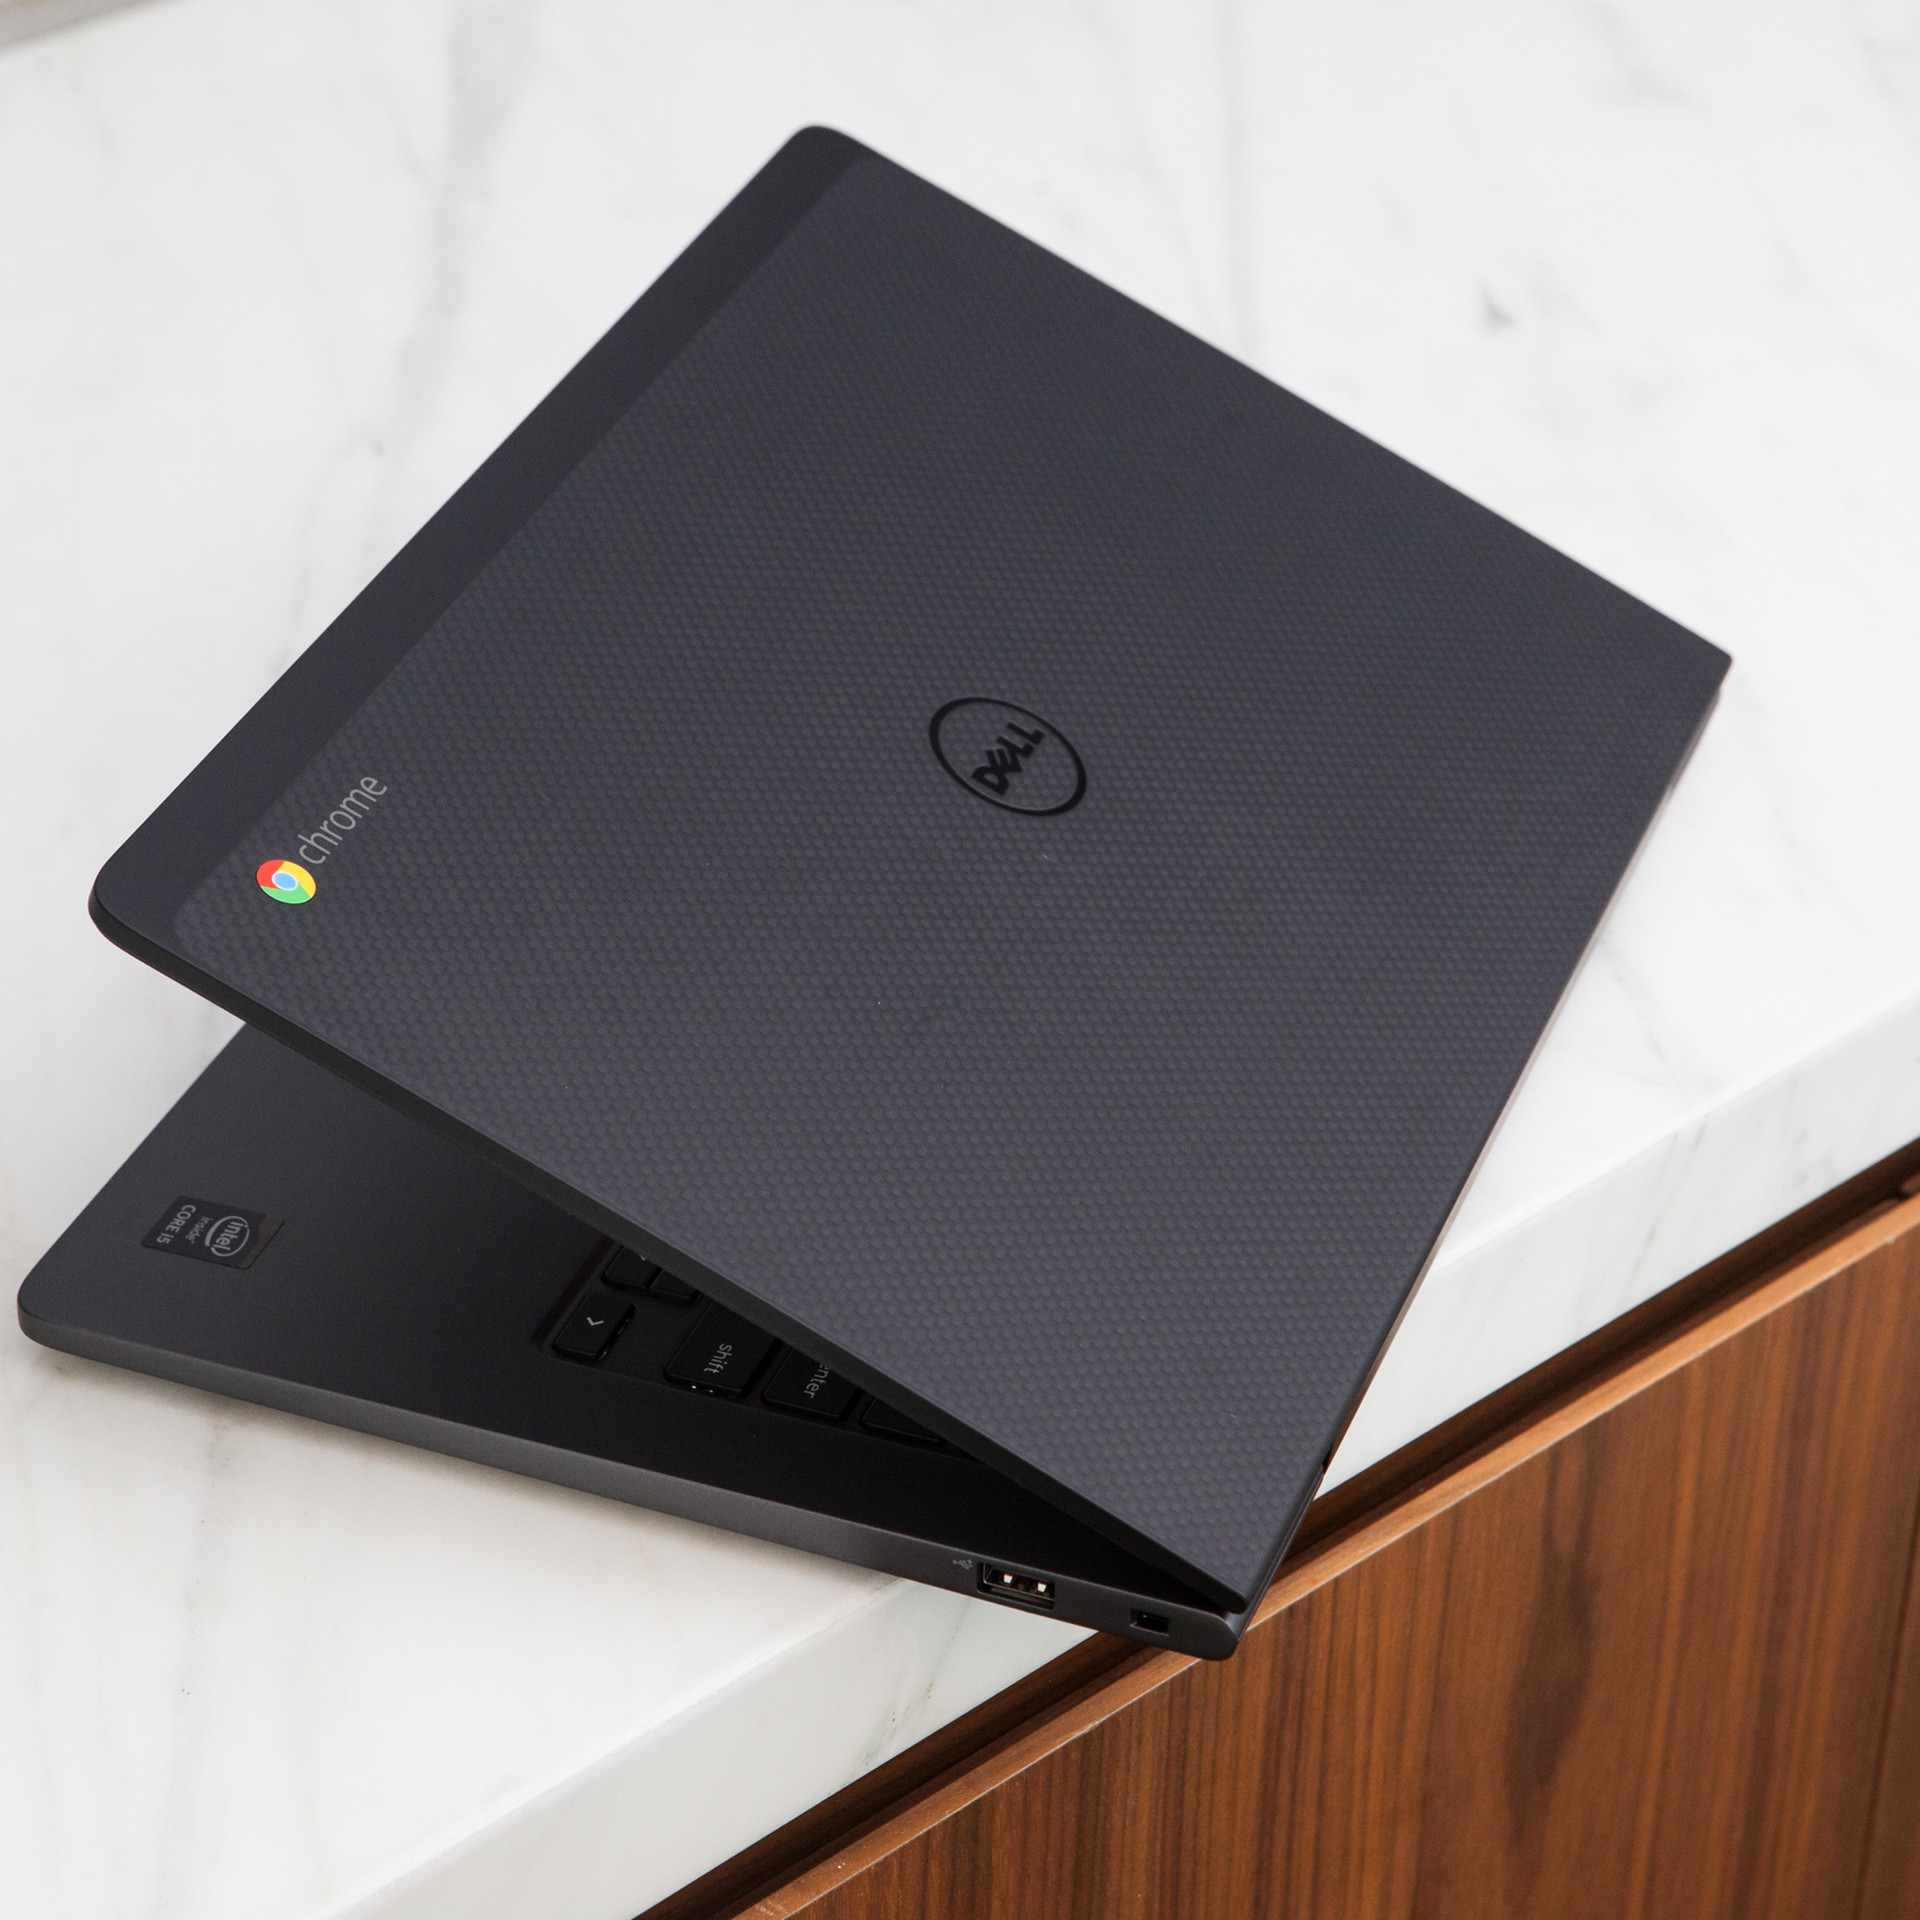 The new Dell Chromebook 13 is one of the most premium Chromebooks yet